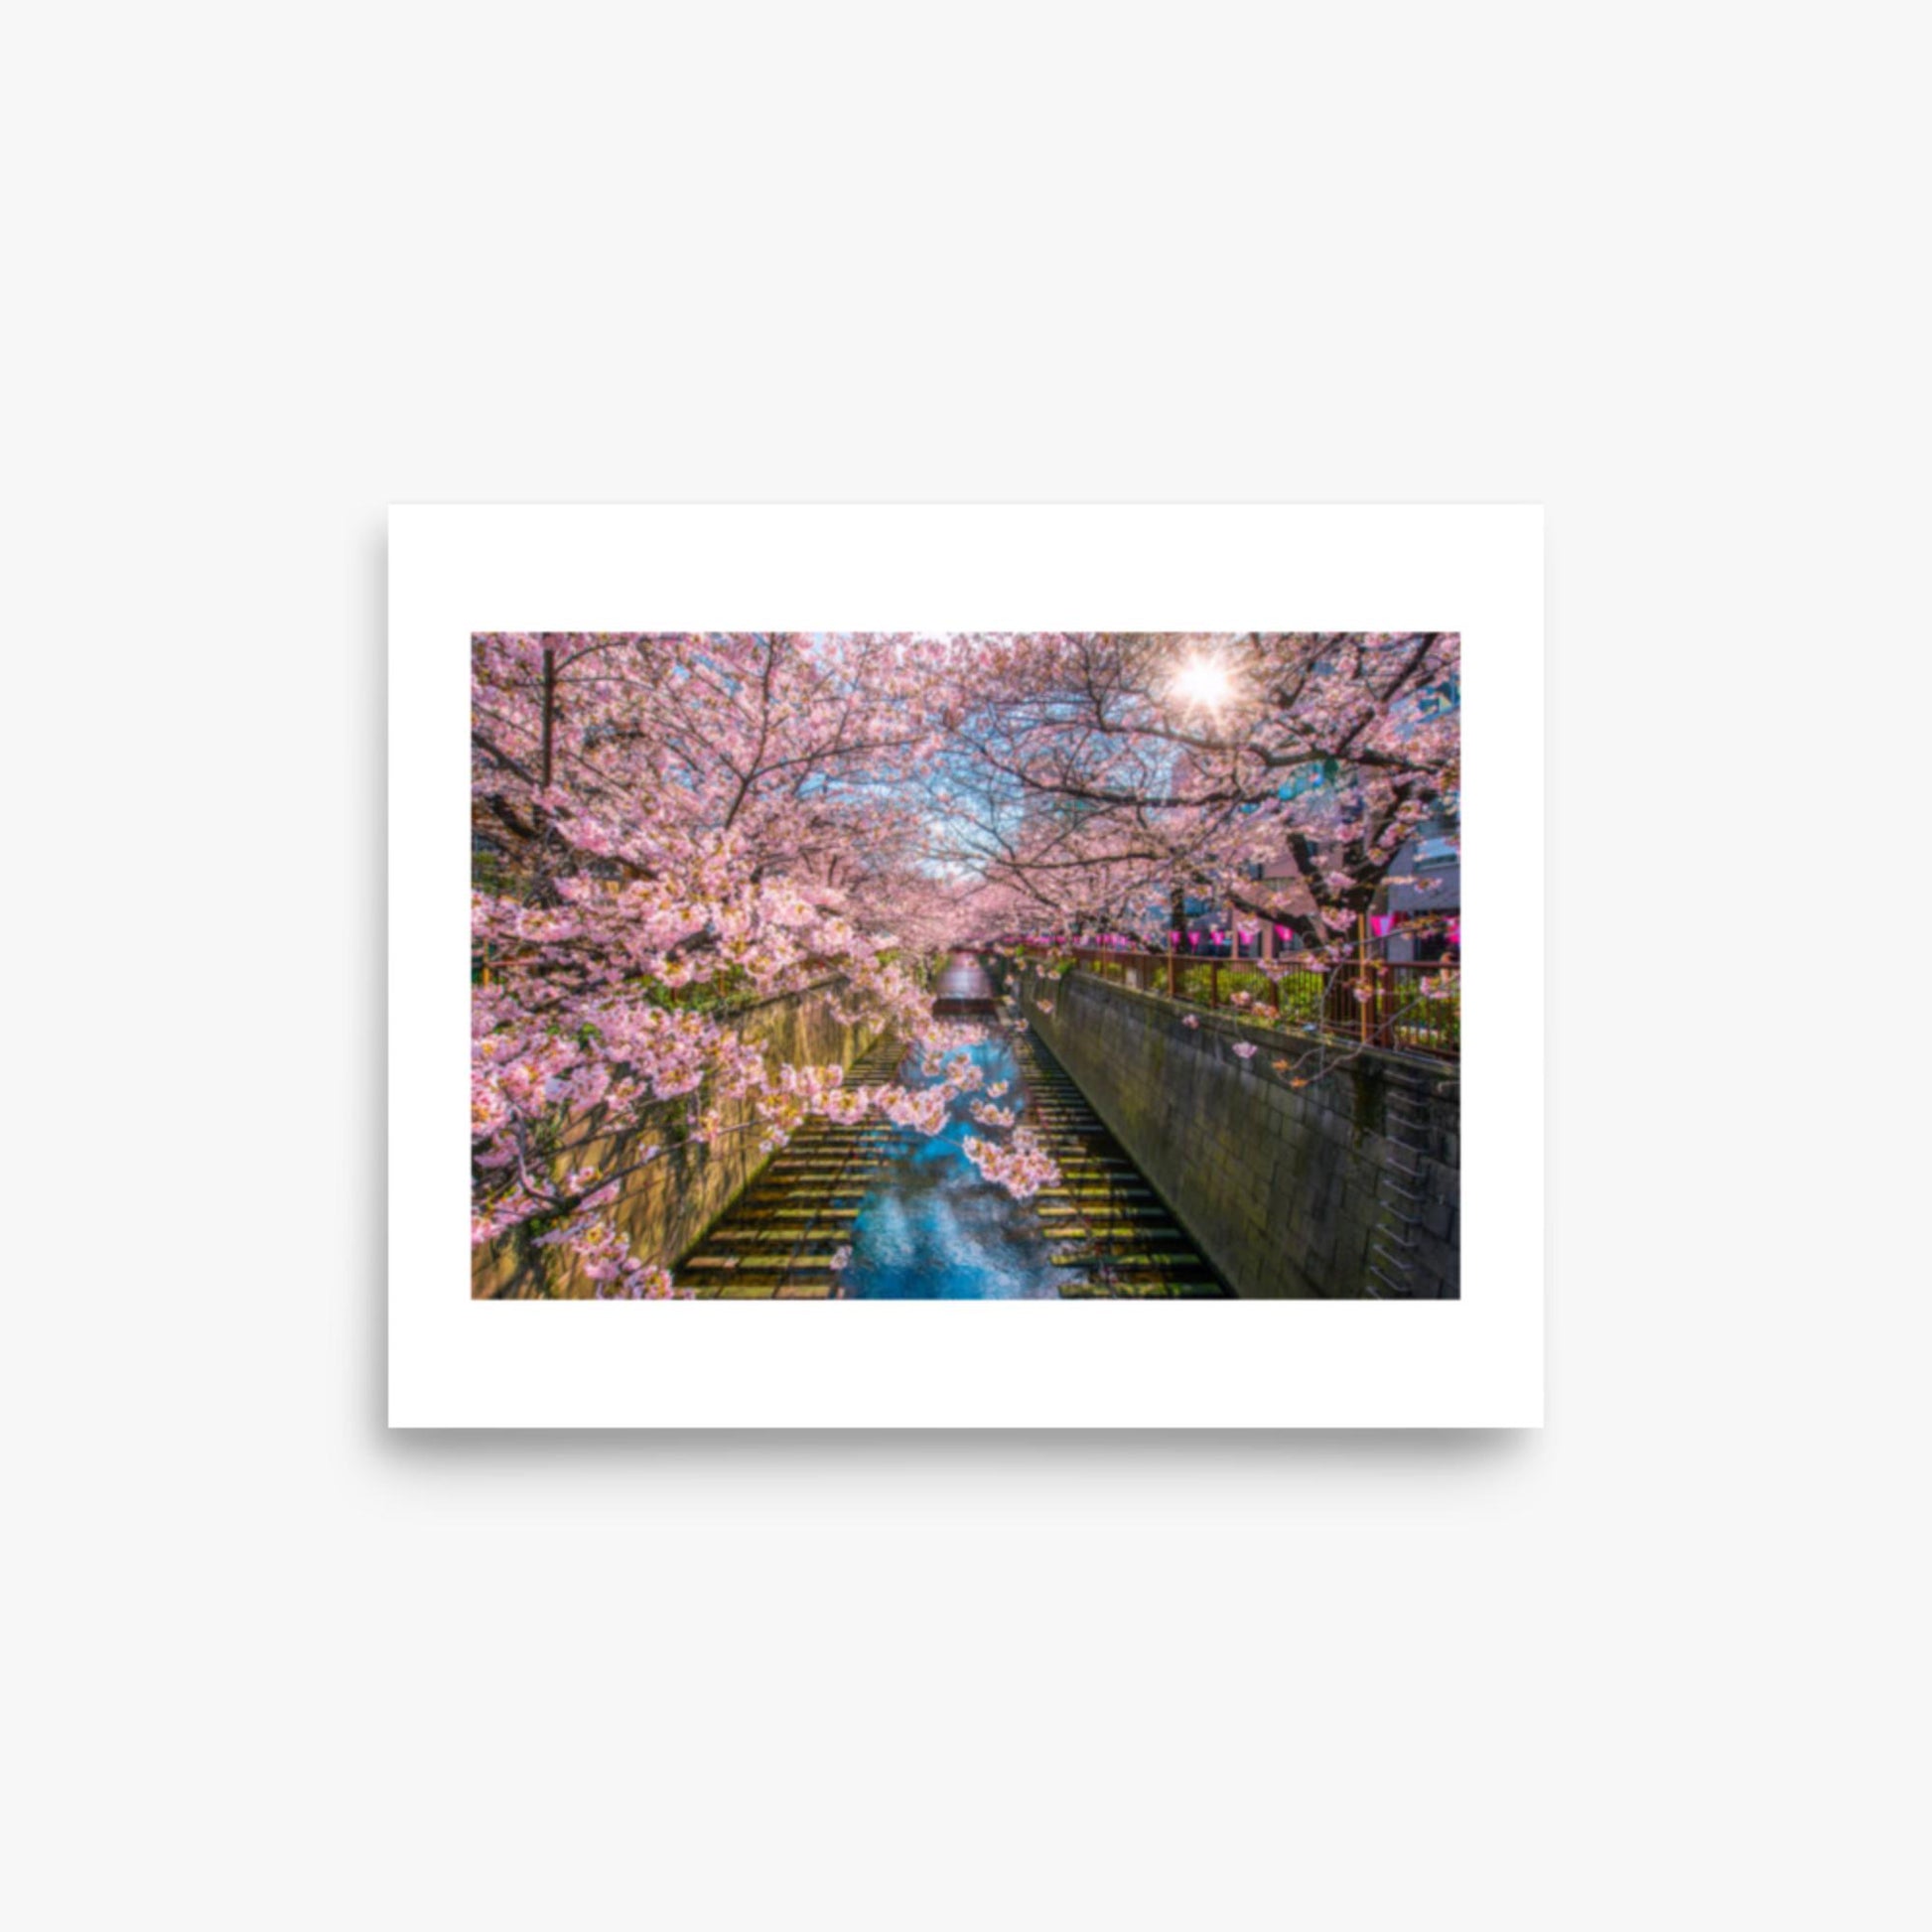 Cherry blossom sakura lined Meguro Canal in Tokyo 8x10 in Poster